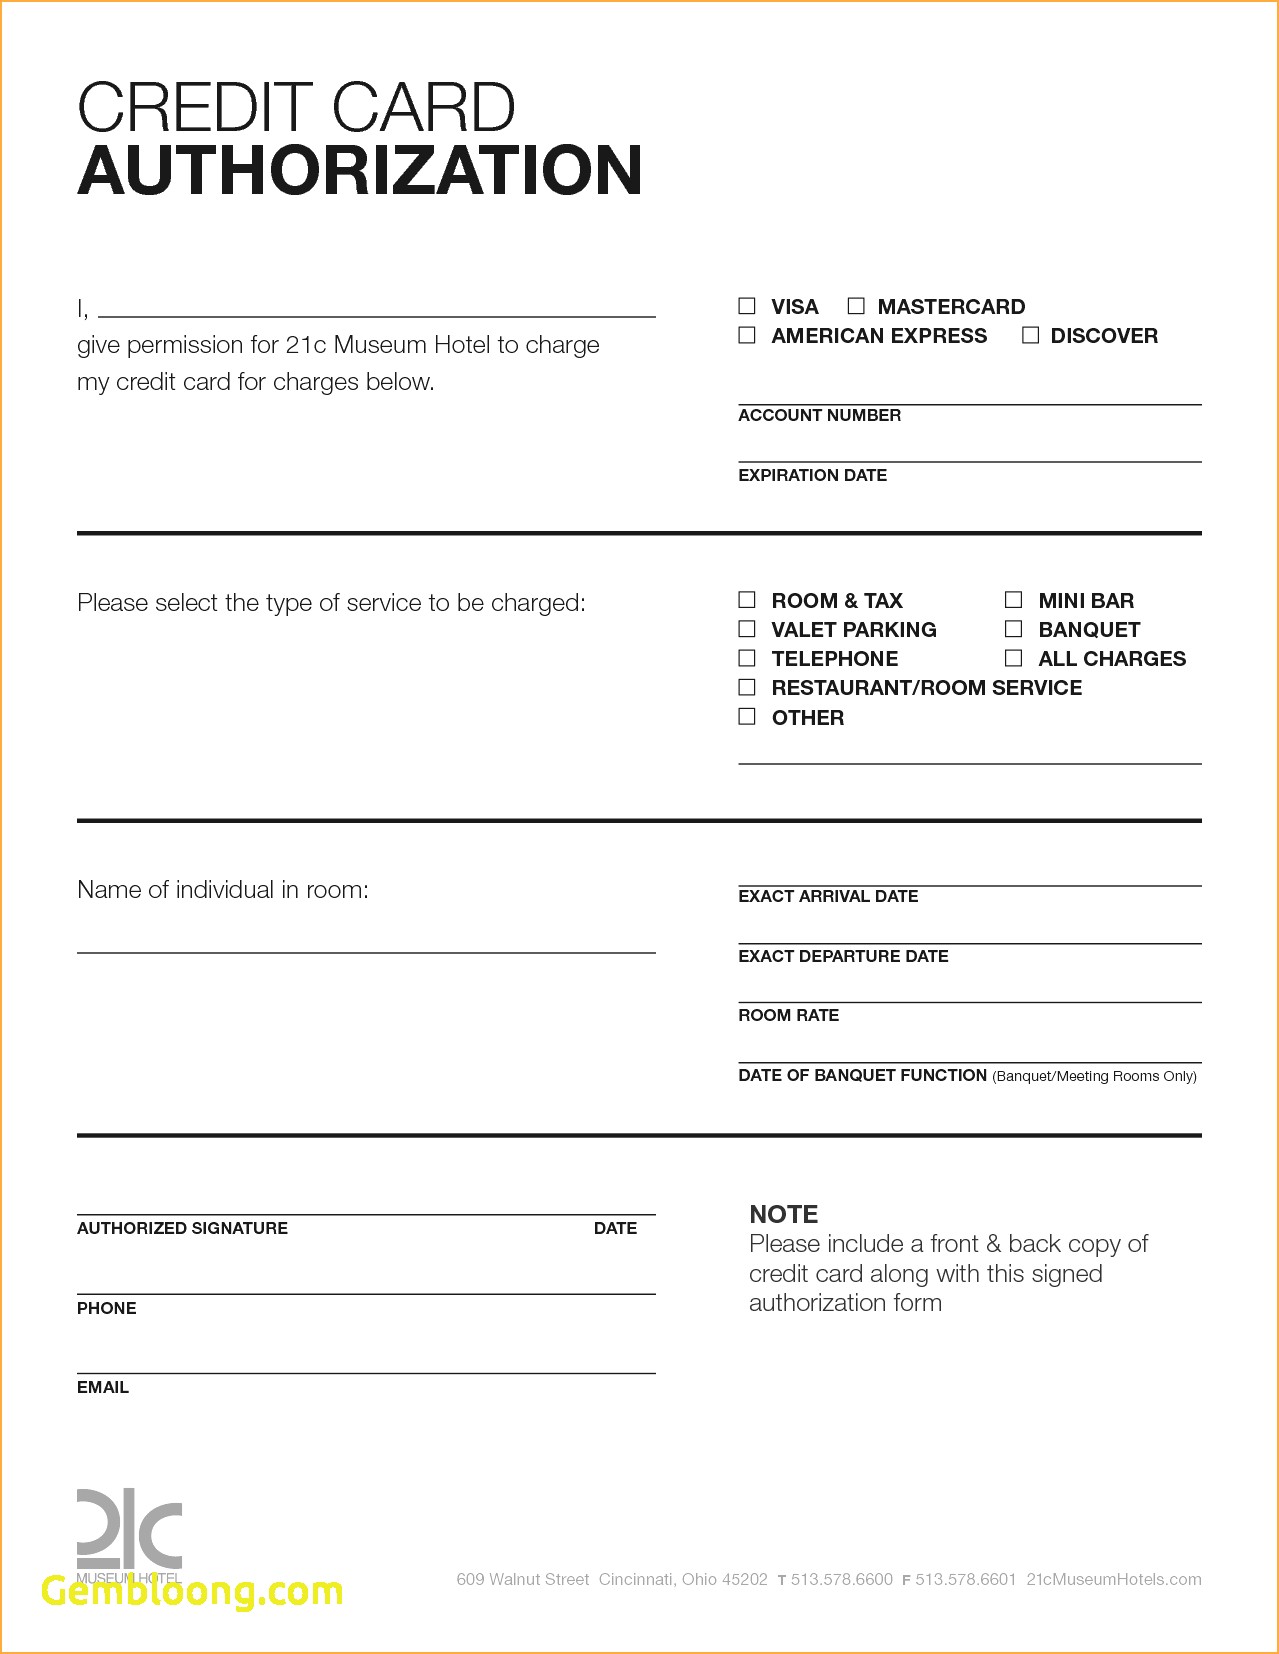 Credit Card Authorization Form Template Word | charlotte clergy coalition